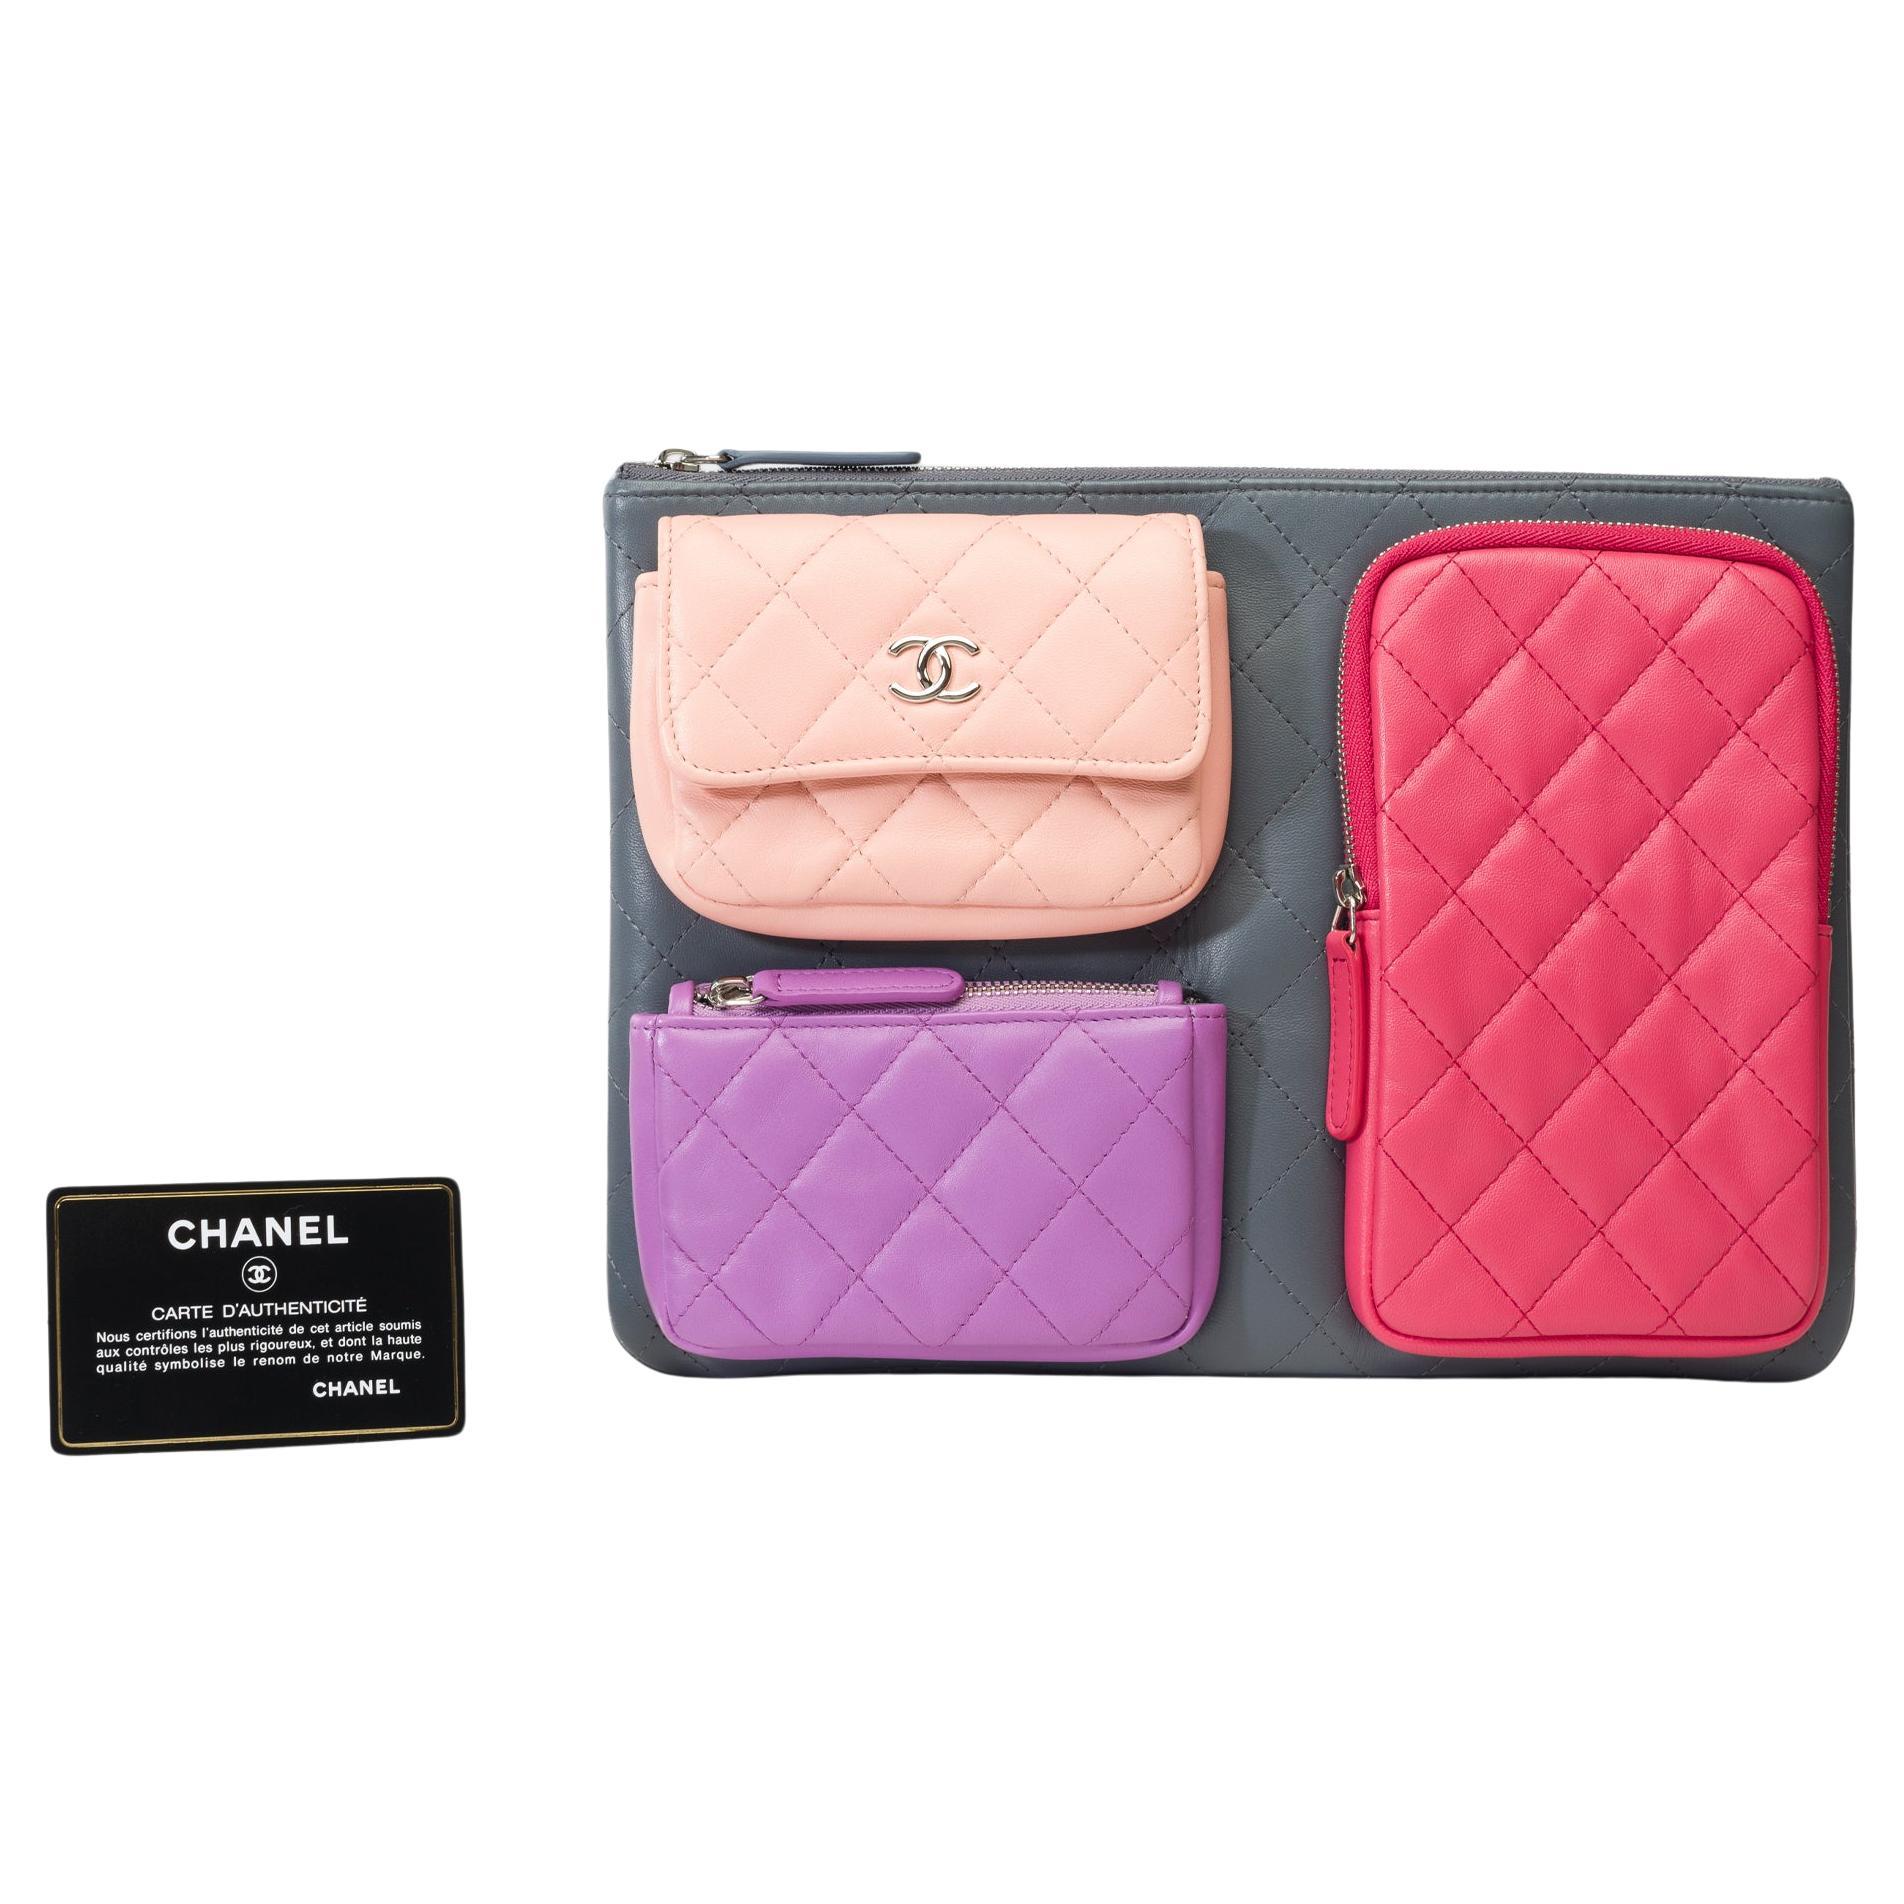 Limited​ ​Edition​ ​Chanel​ ​​ ​Pouch/Clutch​ ​in​ ​grey​ ​quilted​ ​leather​ ​with​ ​three​ ​multicolored​ ​pockets​ ​(grey,​ ​pink,​ ​purple​ ​and​ ​nude),​ ​silver​ ​metal​ ​trim​ ​for​ ​a​ ​hand​ ​carry

A​ ​patch​ ​pocket​ ​on​ ​the​ ​back​